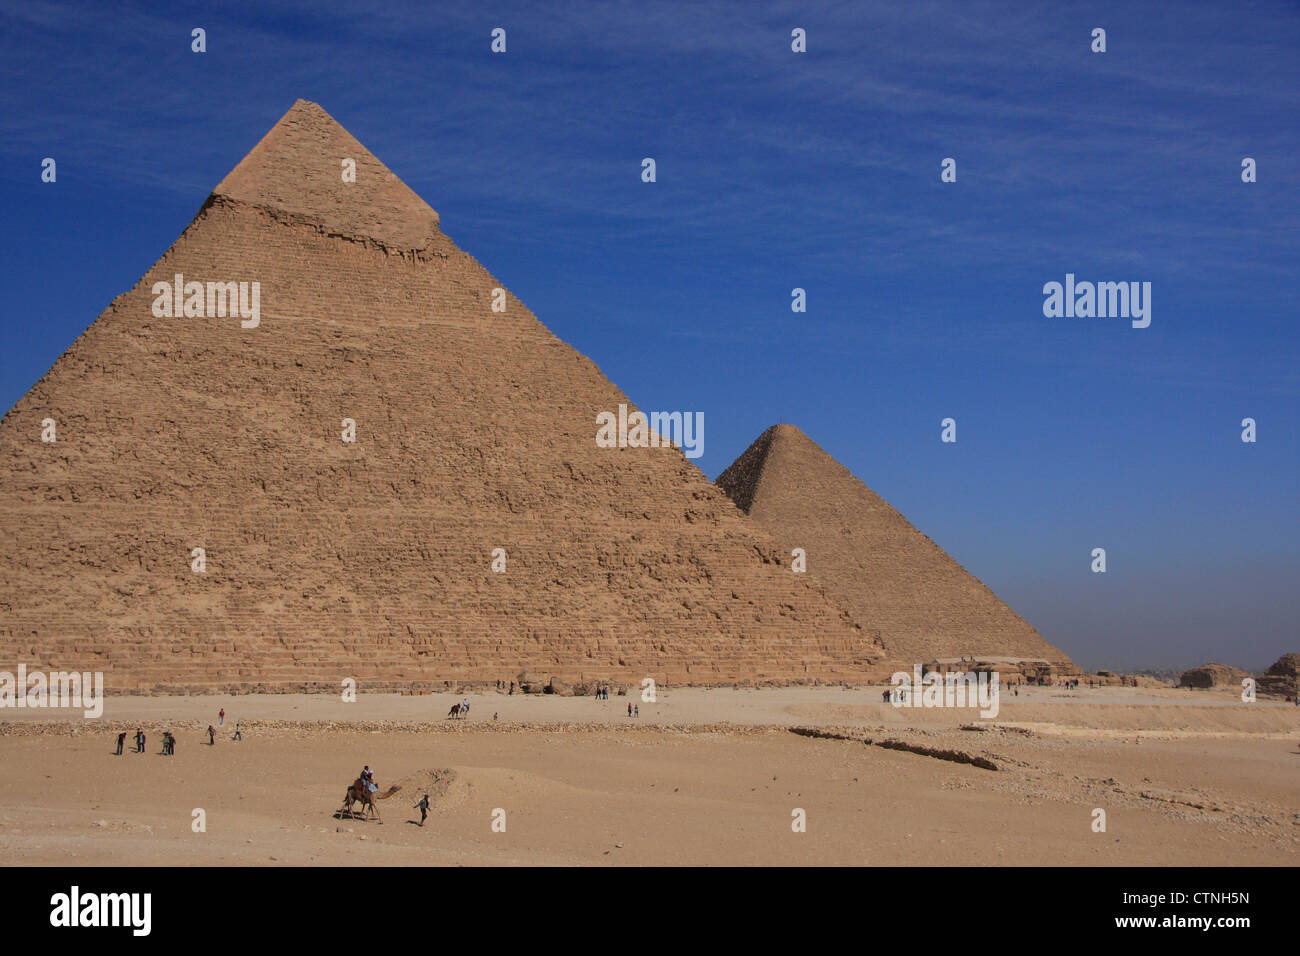 Pyramids of Khafre and Khufu with blue sky and clouds, Cairo, Egypt Stock Photo